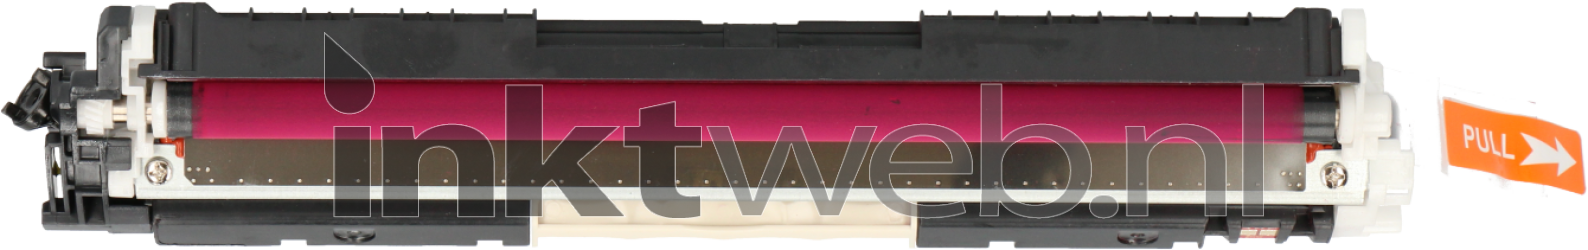 FLWR HP 126A magenta Product only